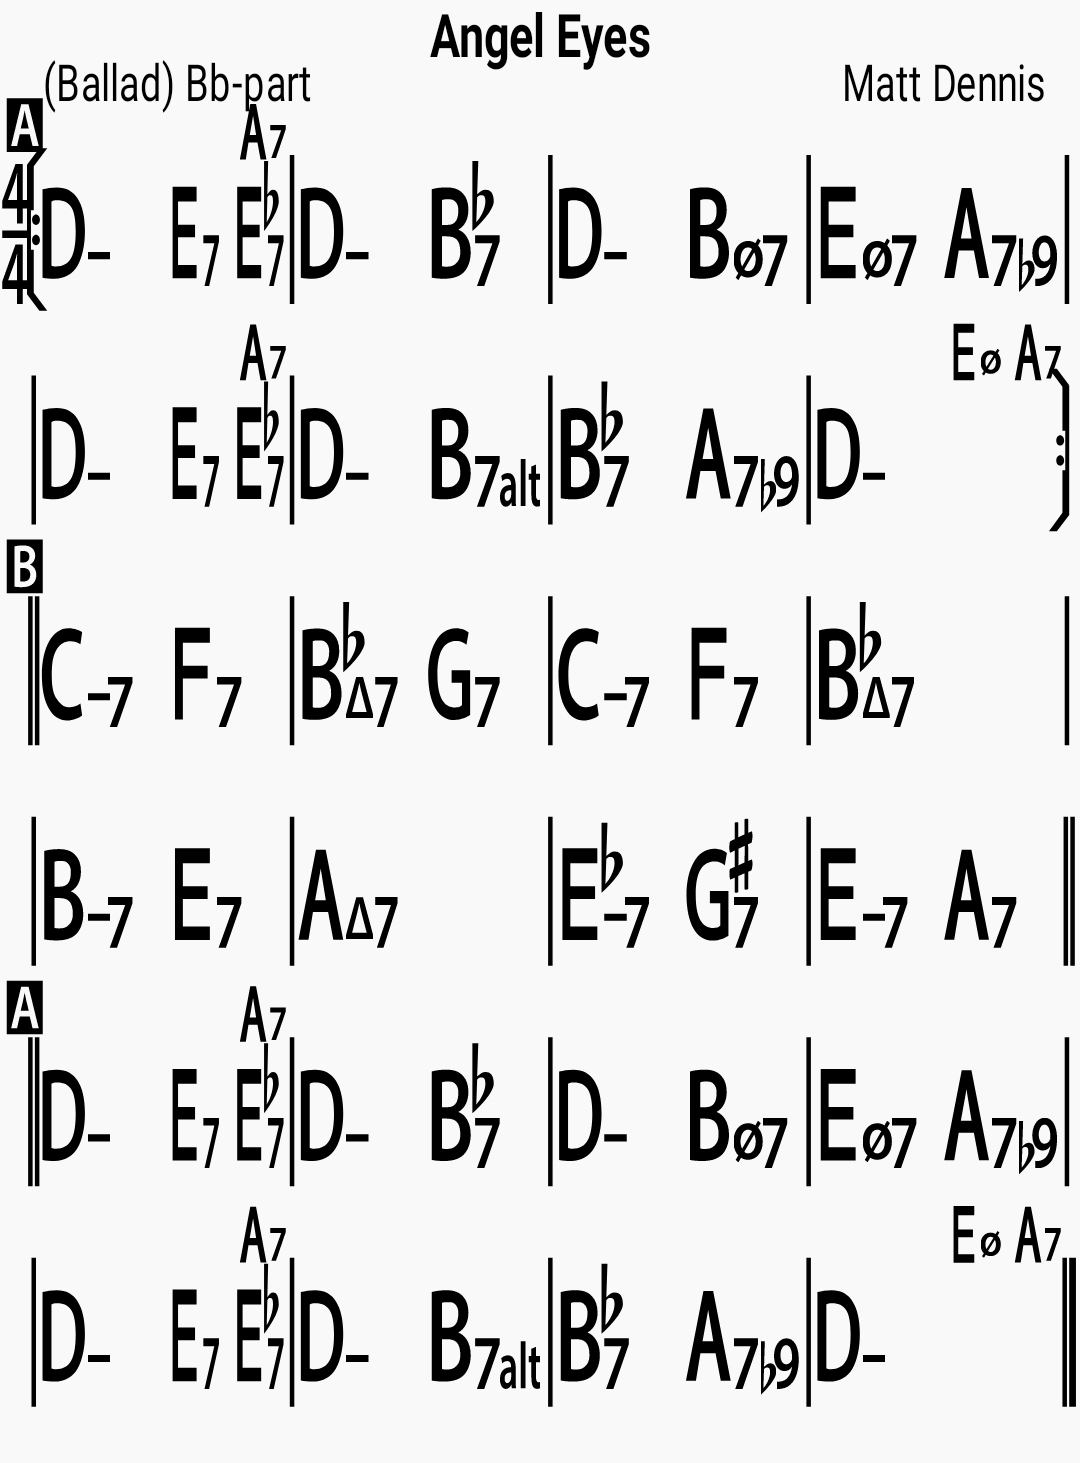 Chord chart for the jazz standard Angel Eyes